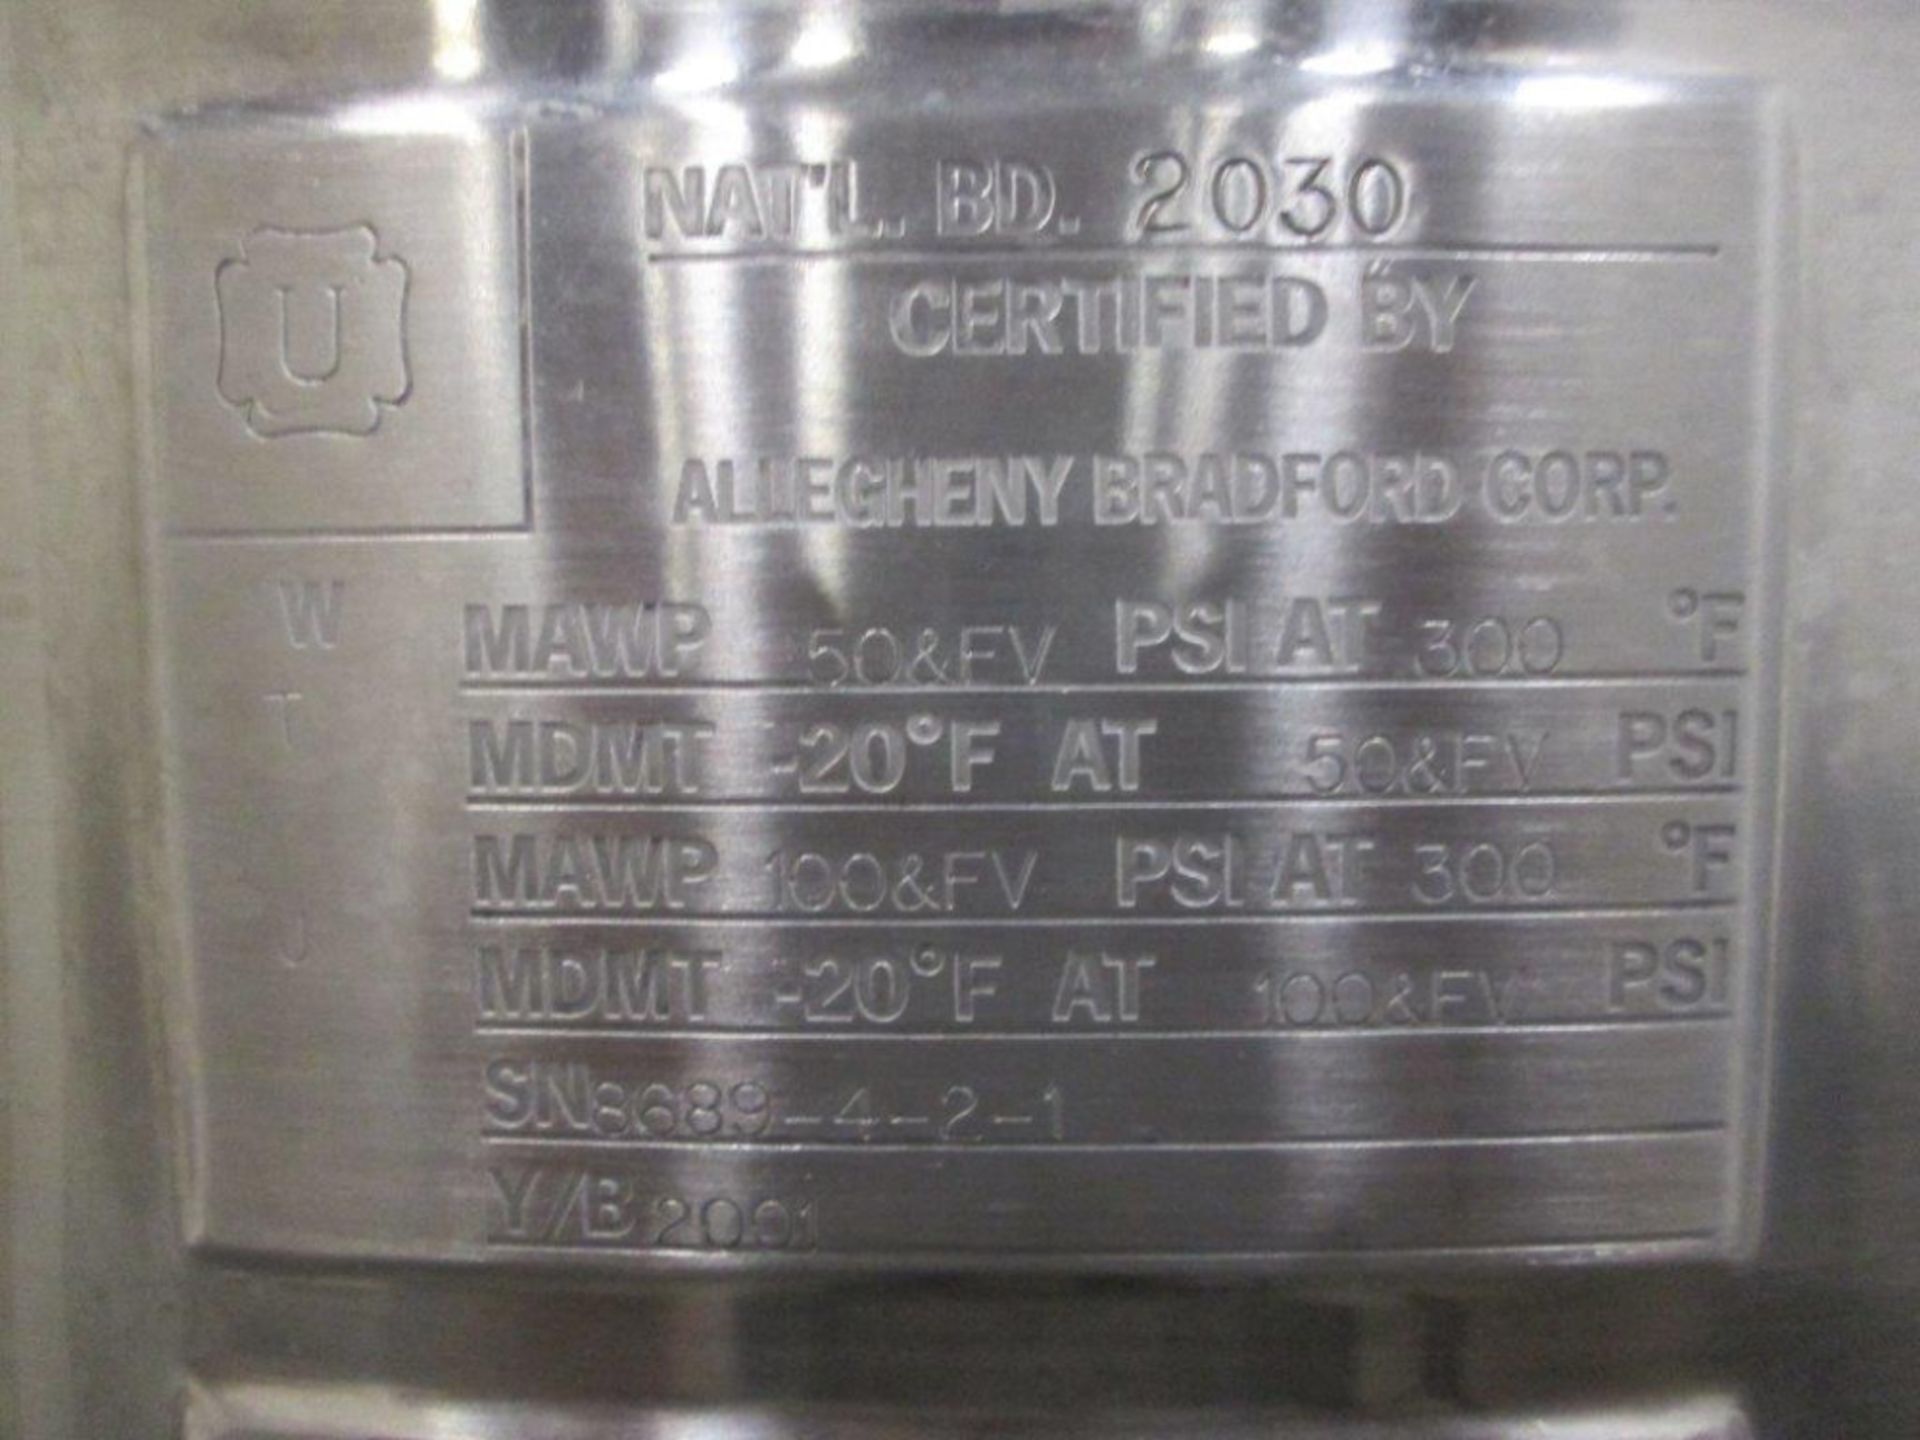 Allegheny Bradford 250L Jacketed Vessel - Image 7 of 7